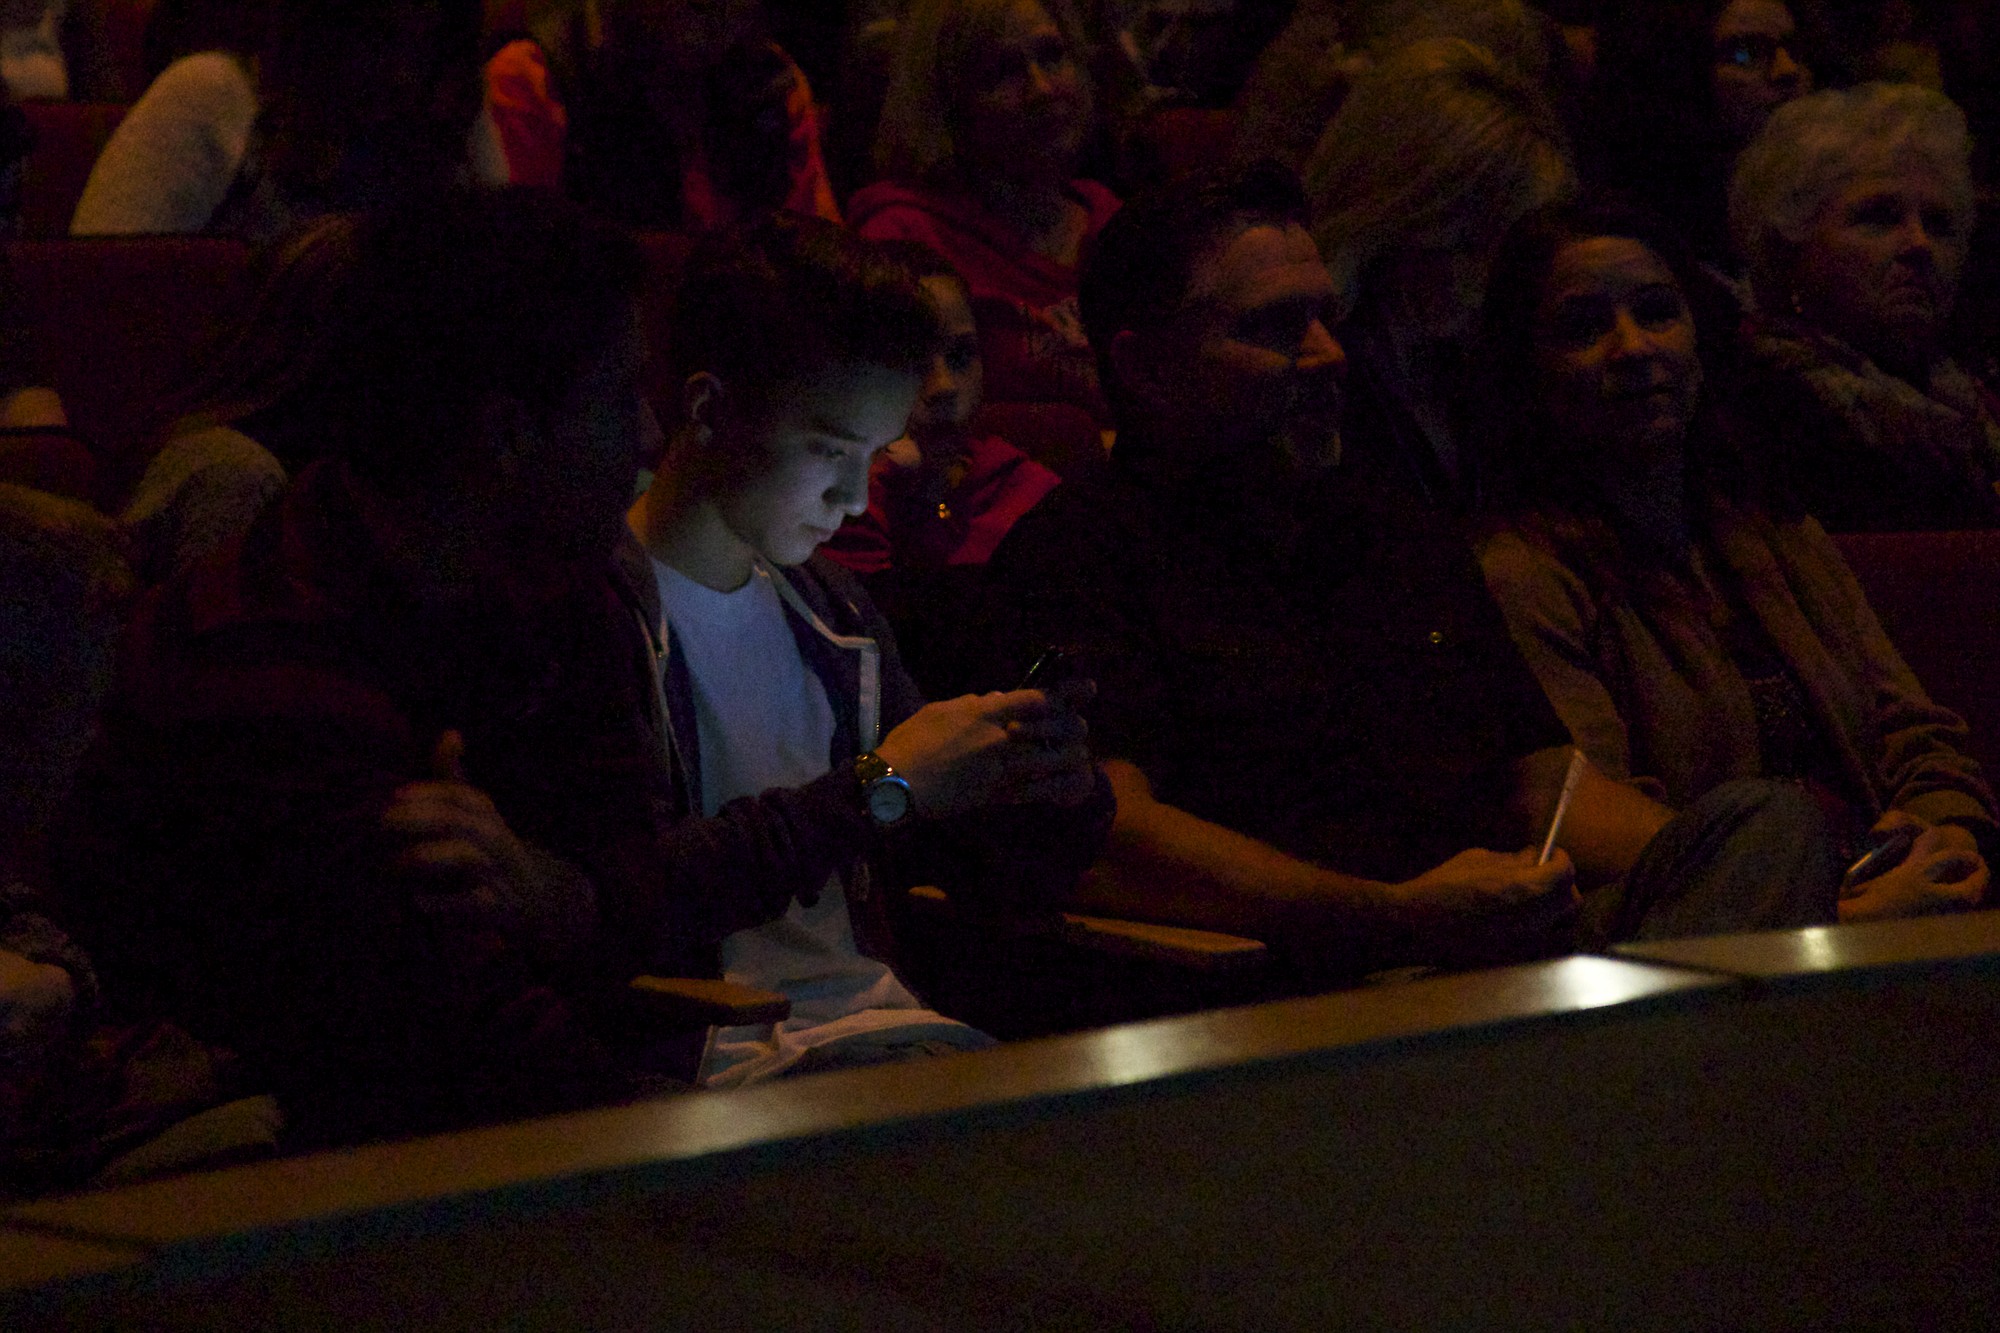 Daniel Seavey, 15, checks his phone after his screen debut on &quot;American Idol&quot; during a screening at Union High School.